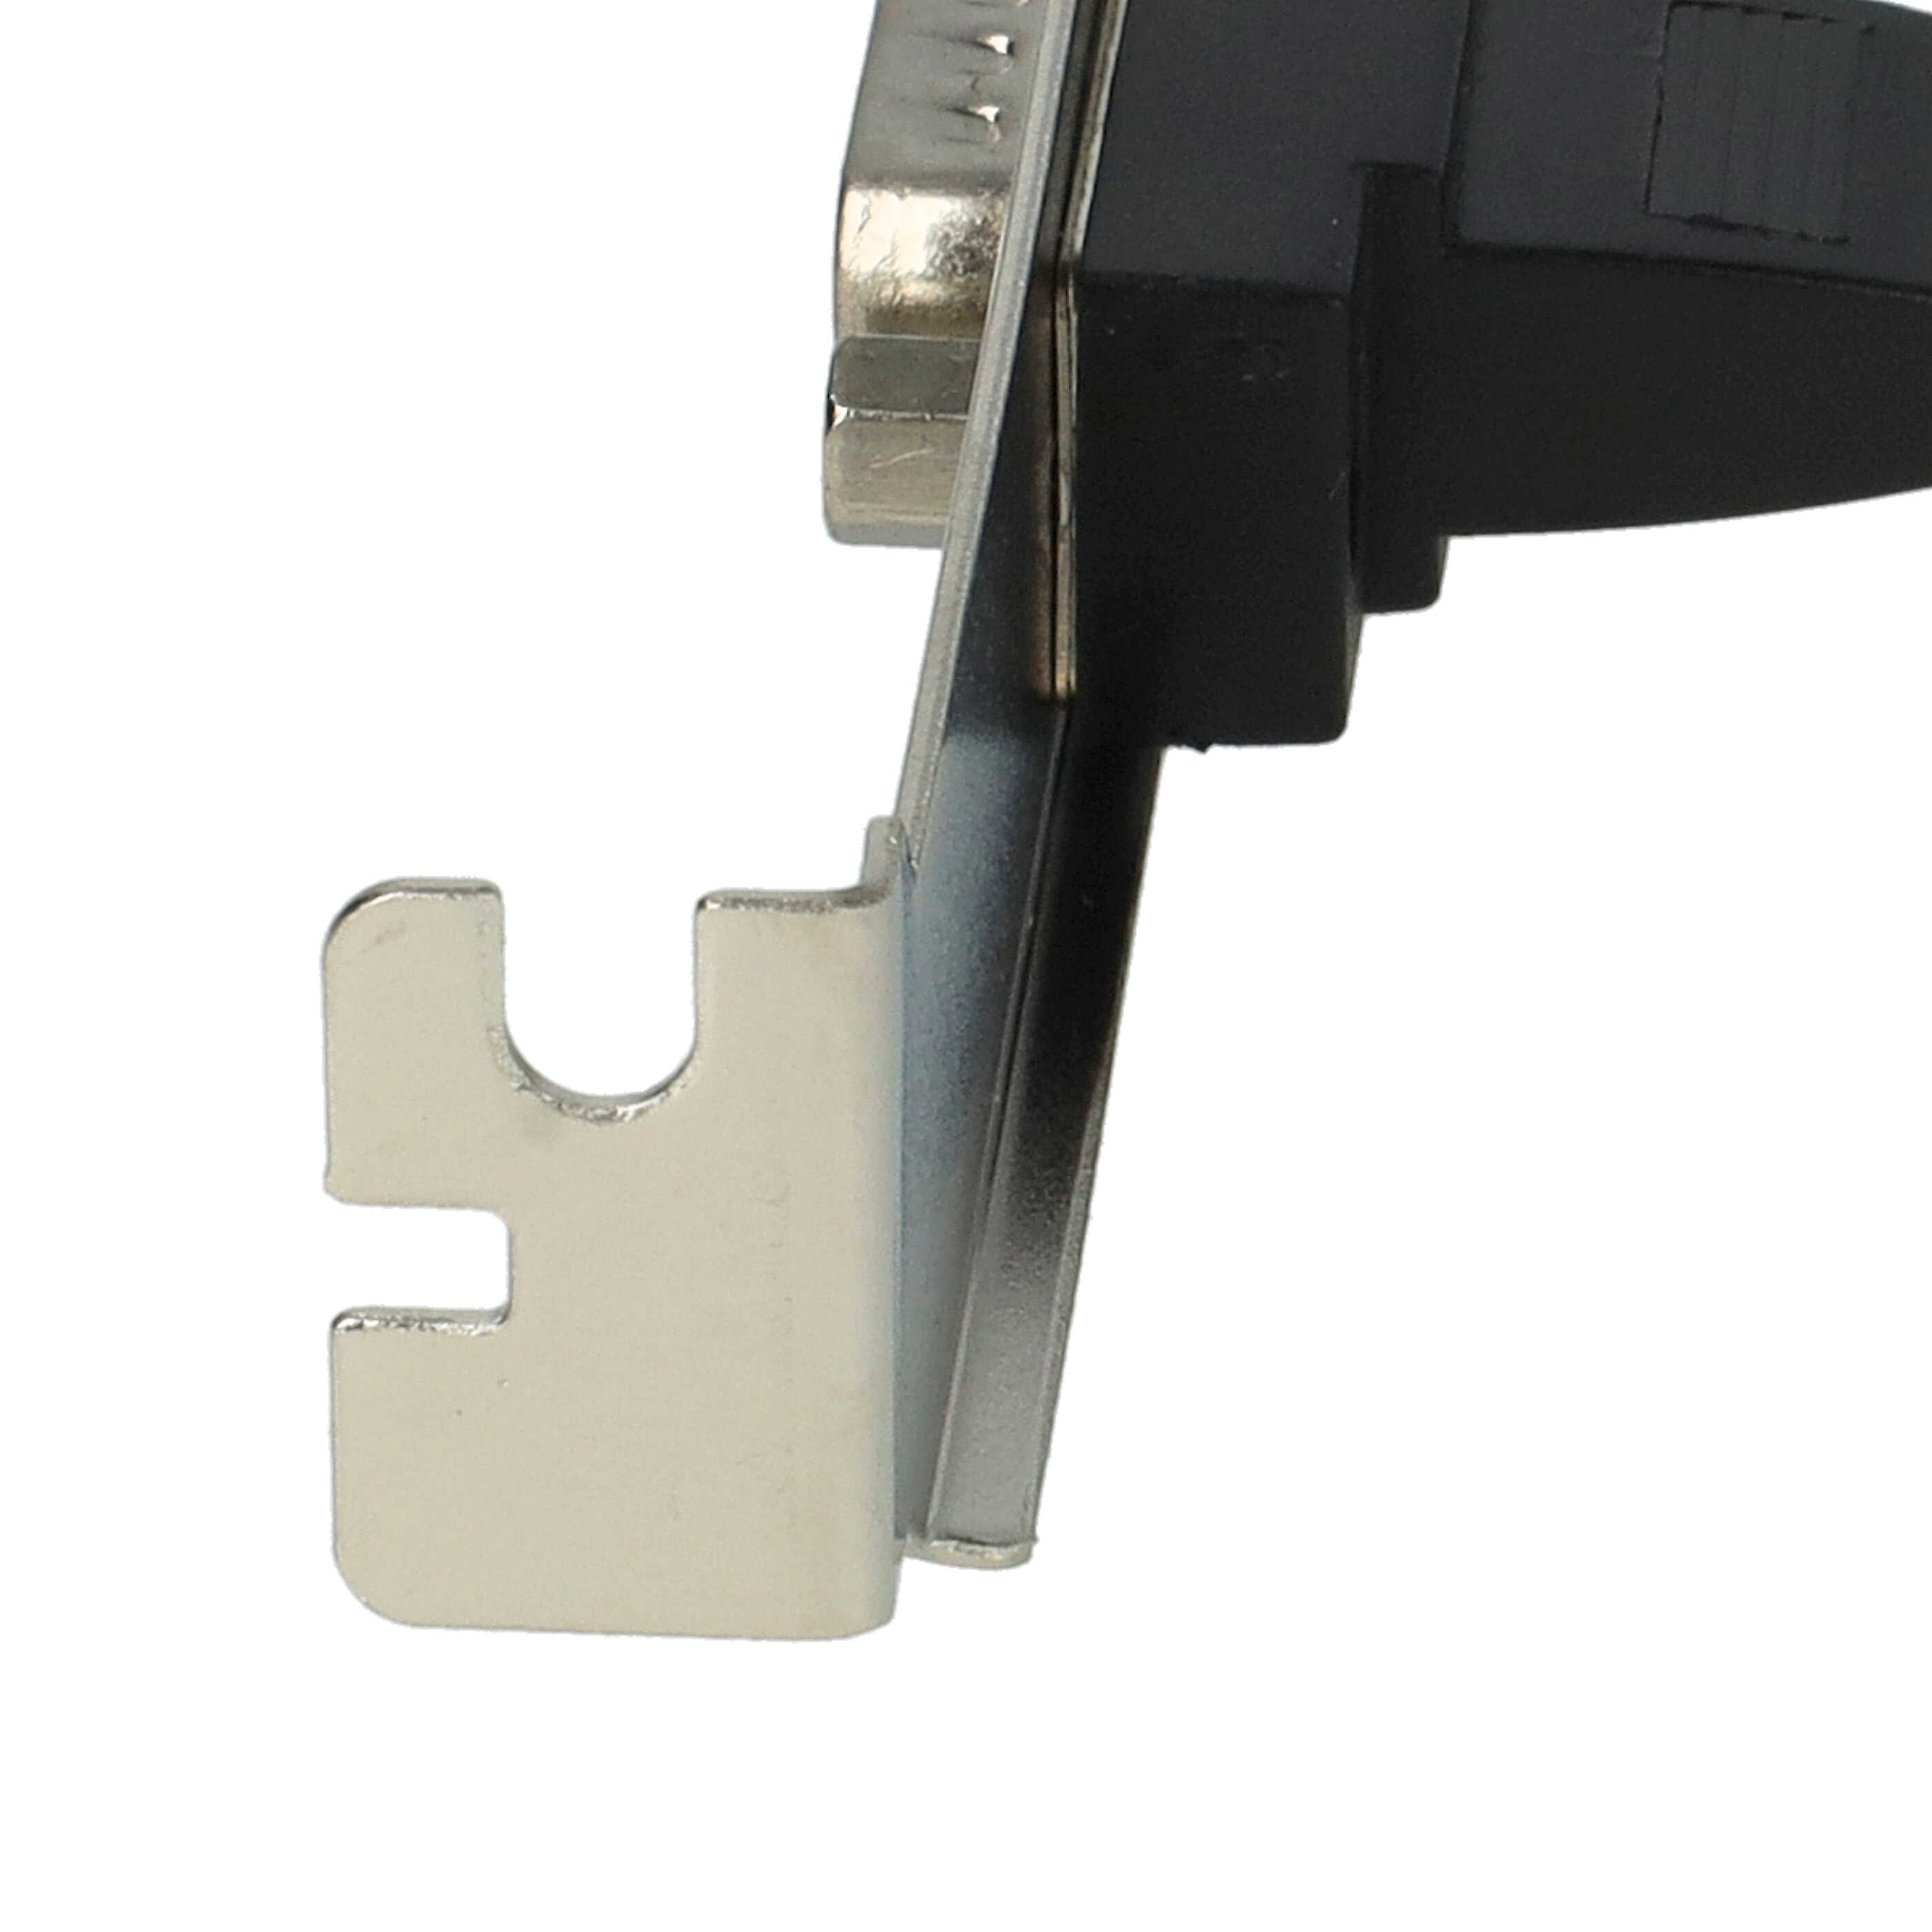 RS232 Slot Bracket suitable forComputer, PC with 10 Pin Motherboard Connector